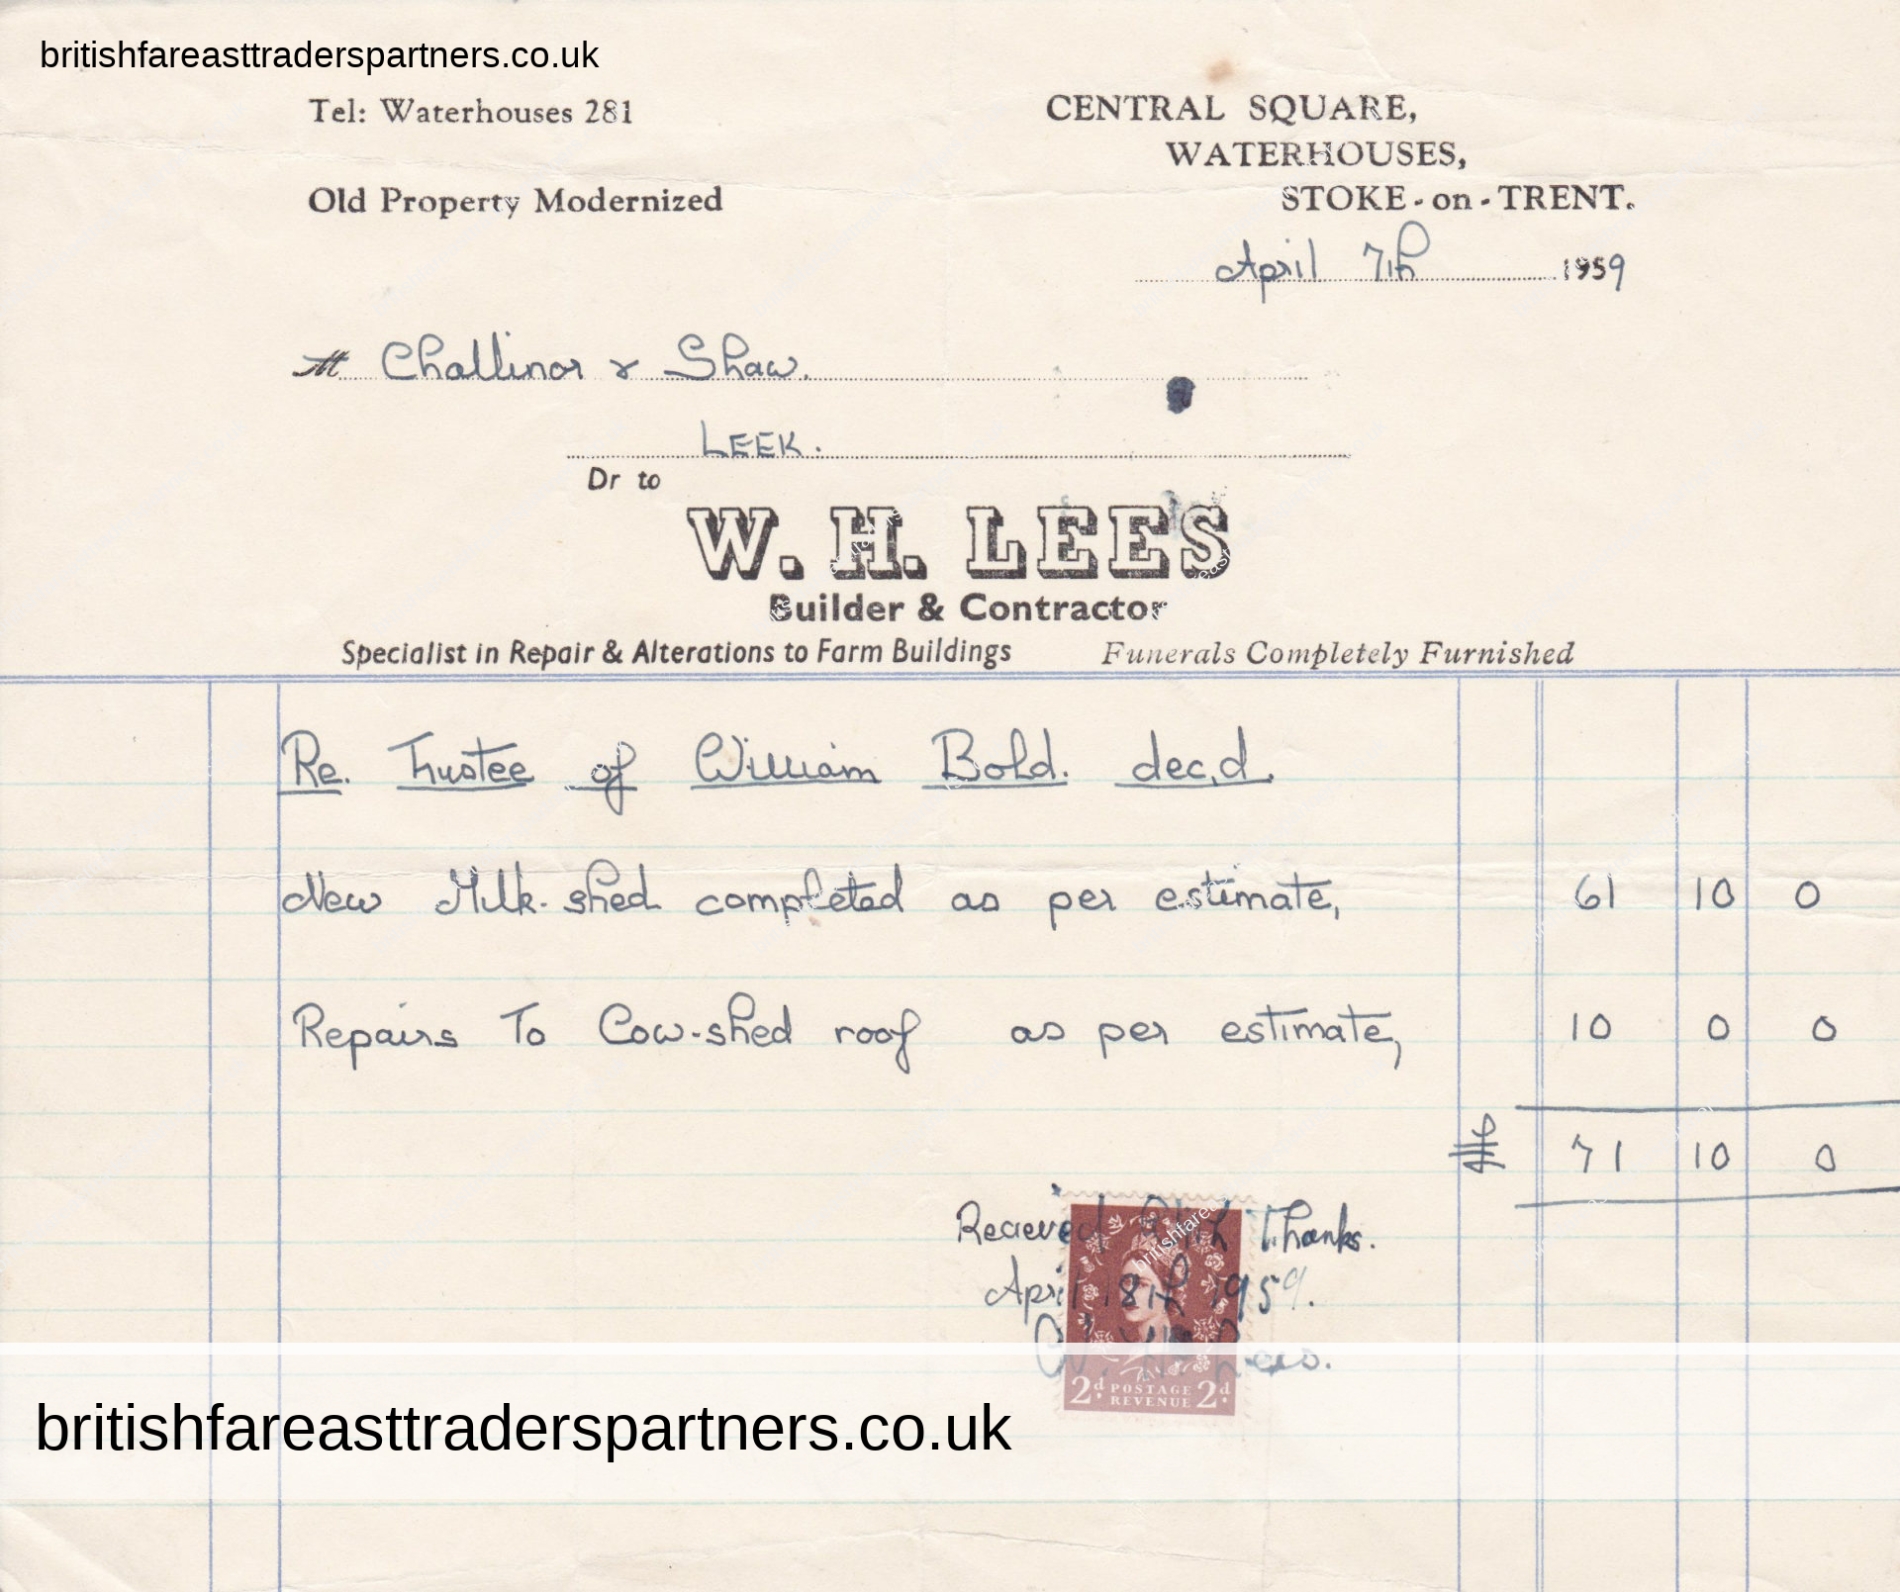 VINTAGE 1959 INVOICE / BILLHEAD W.H. LEES BUILDER & CONTRACTOR STOKE-ON-TRENT COLLECTABLES | PAPER & EPHEMERA BUSINESS | COMPANIES |  INVESTMENTS | INDUSTRIES | HERITAGE | HISTORY